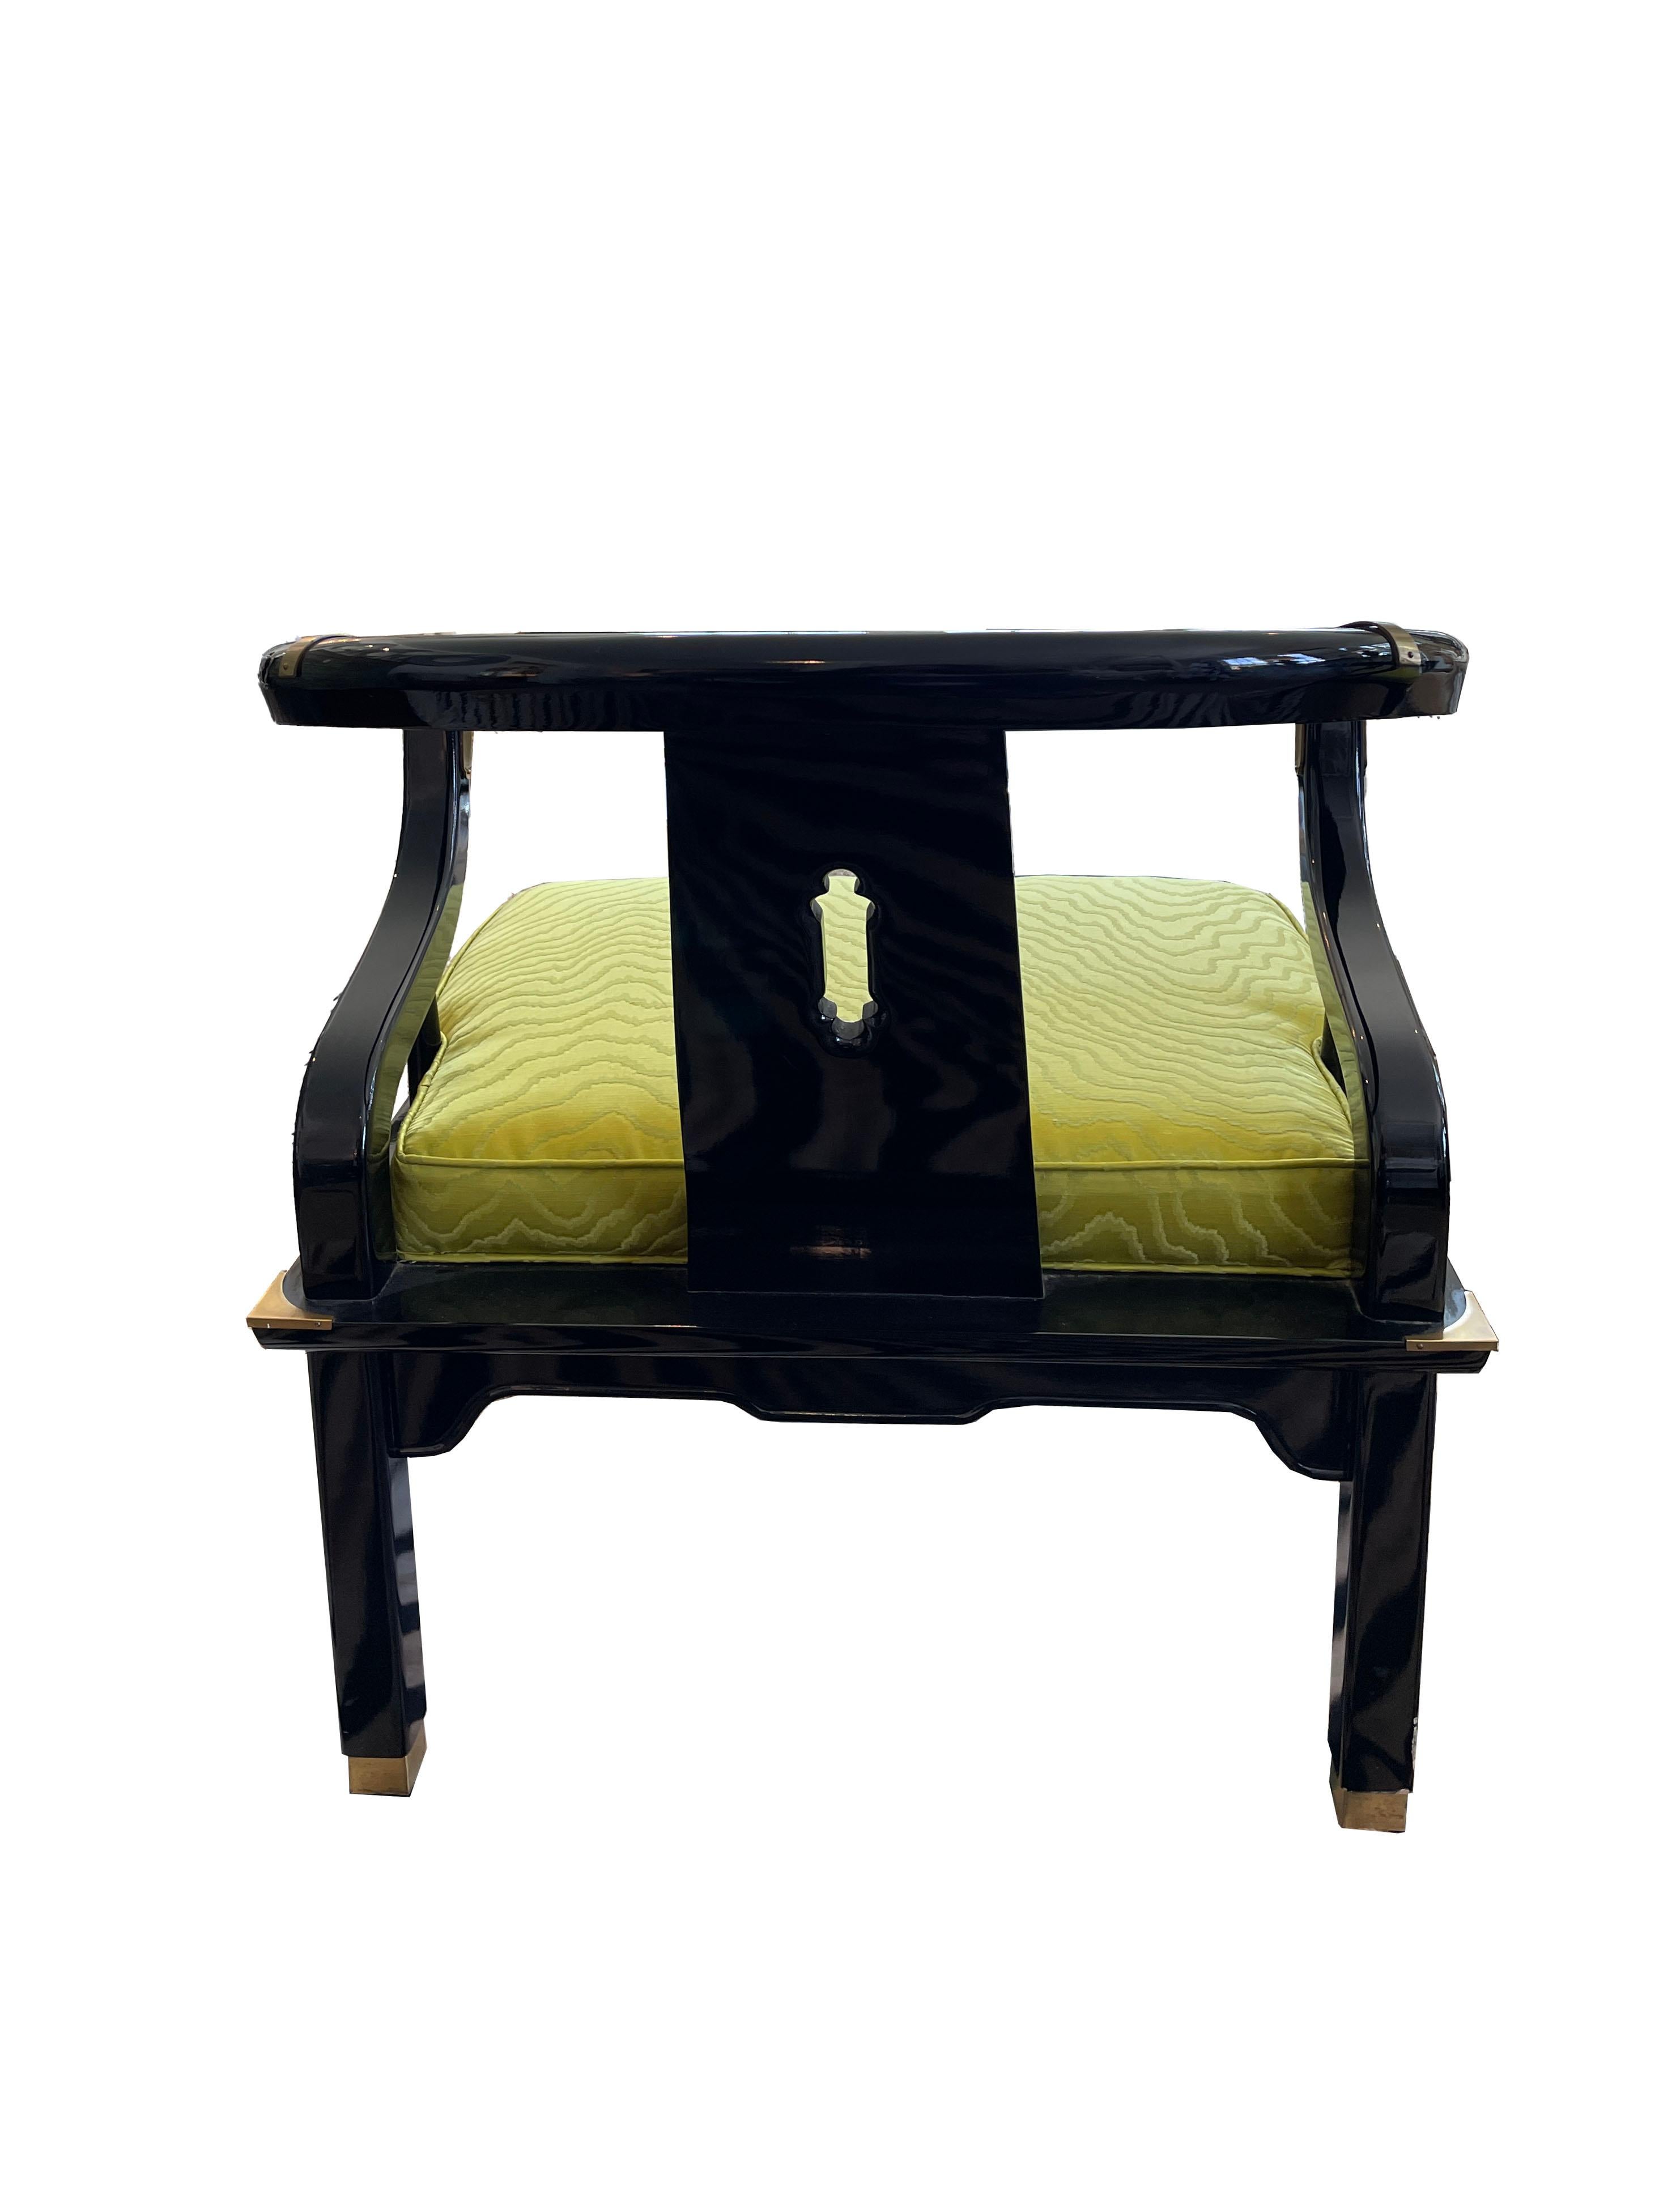 A pair of black lacquer 1960's vintage ming style chairs by James Mont for Century Furniture. These stylish and timeless chairs have been reupholstered in Kravet Faux Bois Citrine fabric. Brass Accents are original.